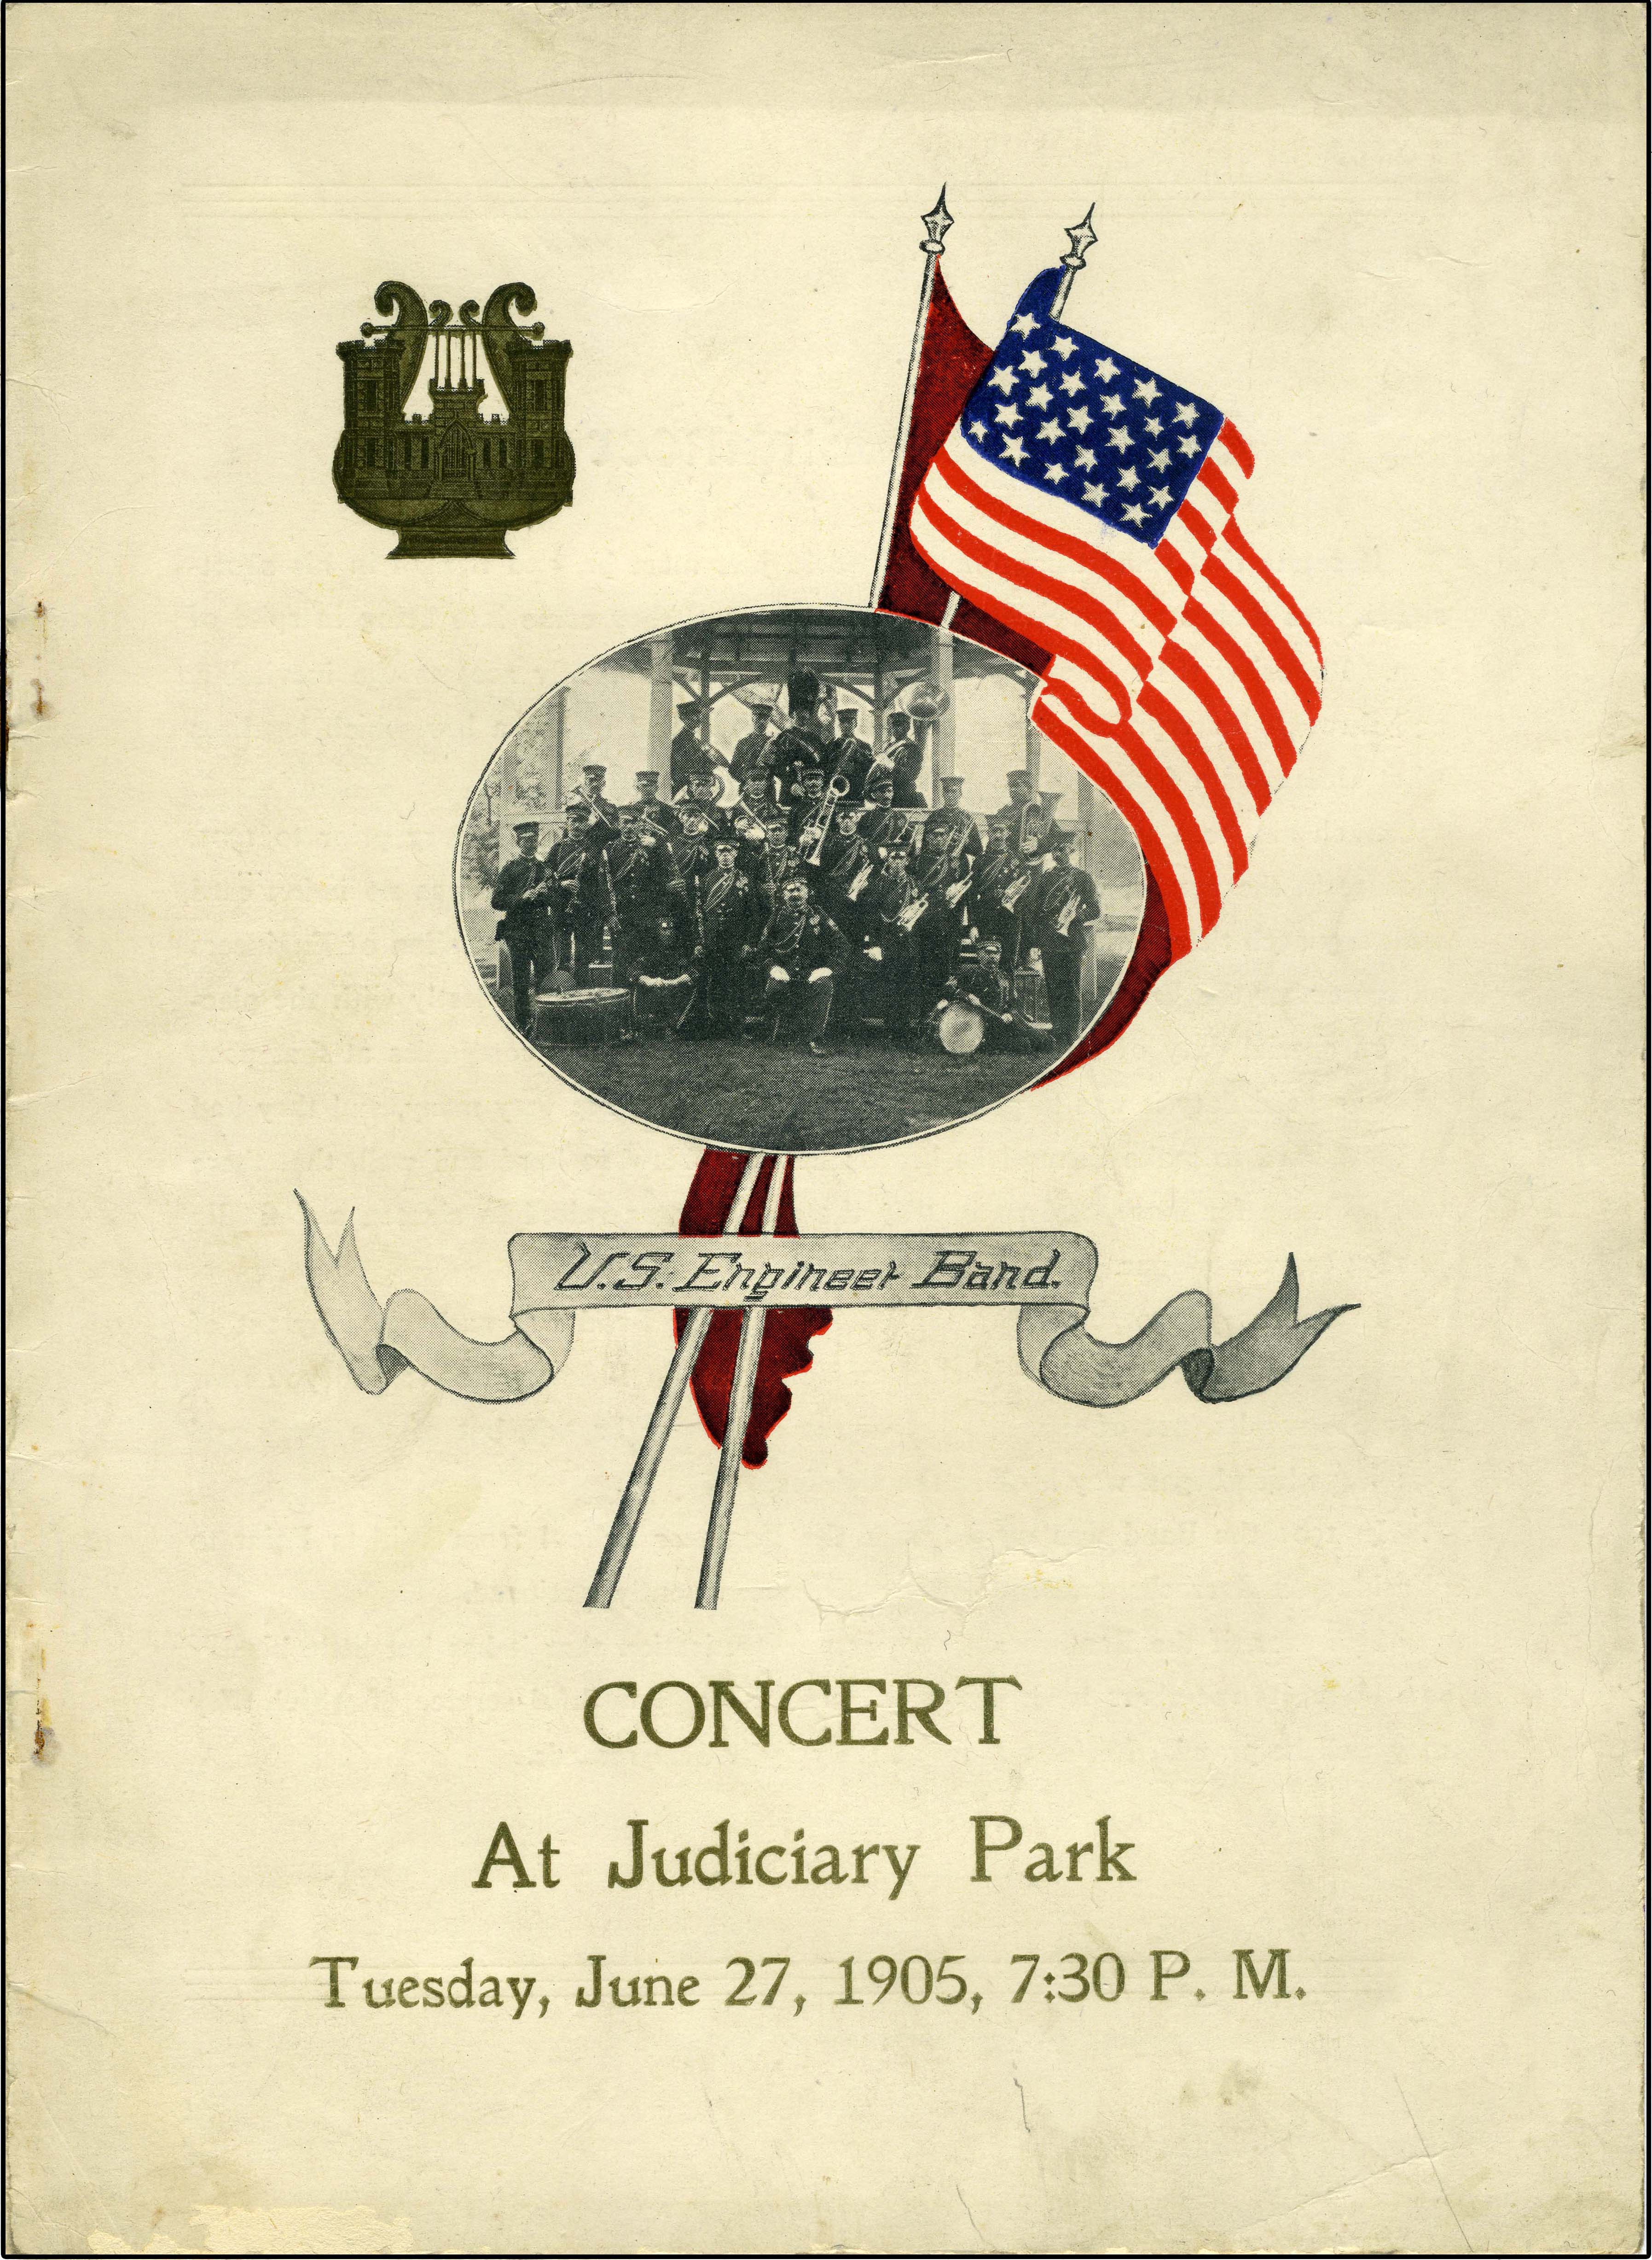 Band program from 1905